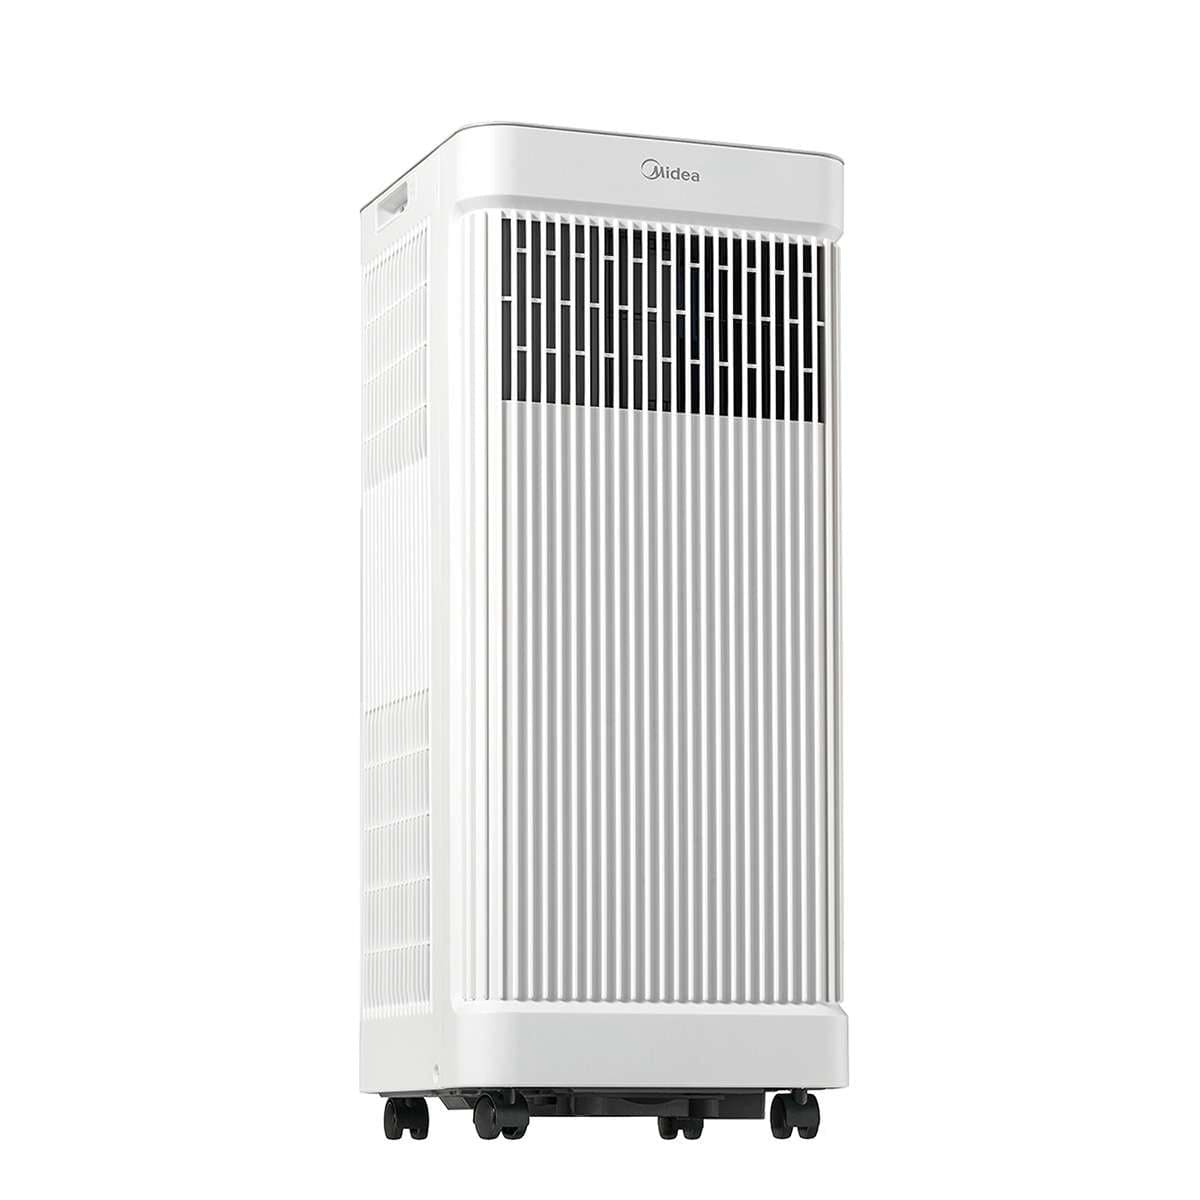 Midea 250 sq ft 6,000 BTU 3-in-1 Programmable Portable Air Conditioner - Seller Refurbished